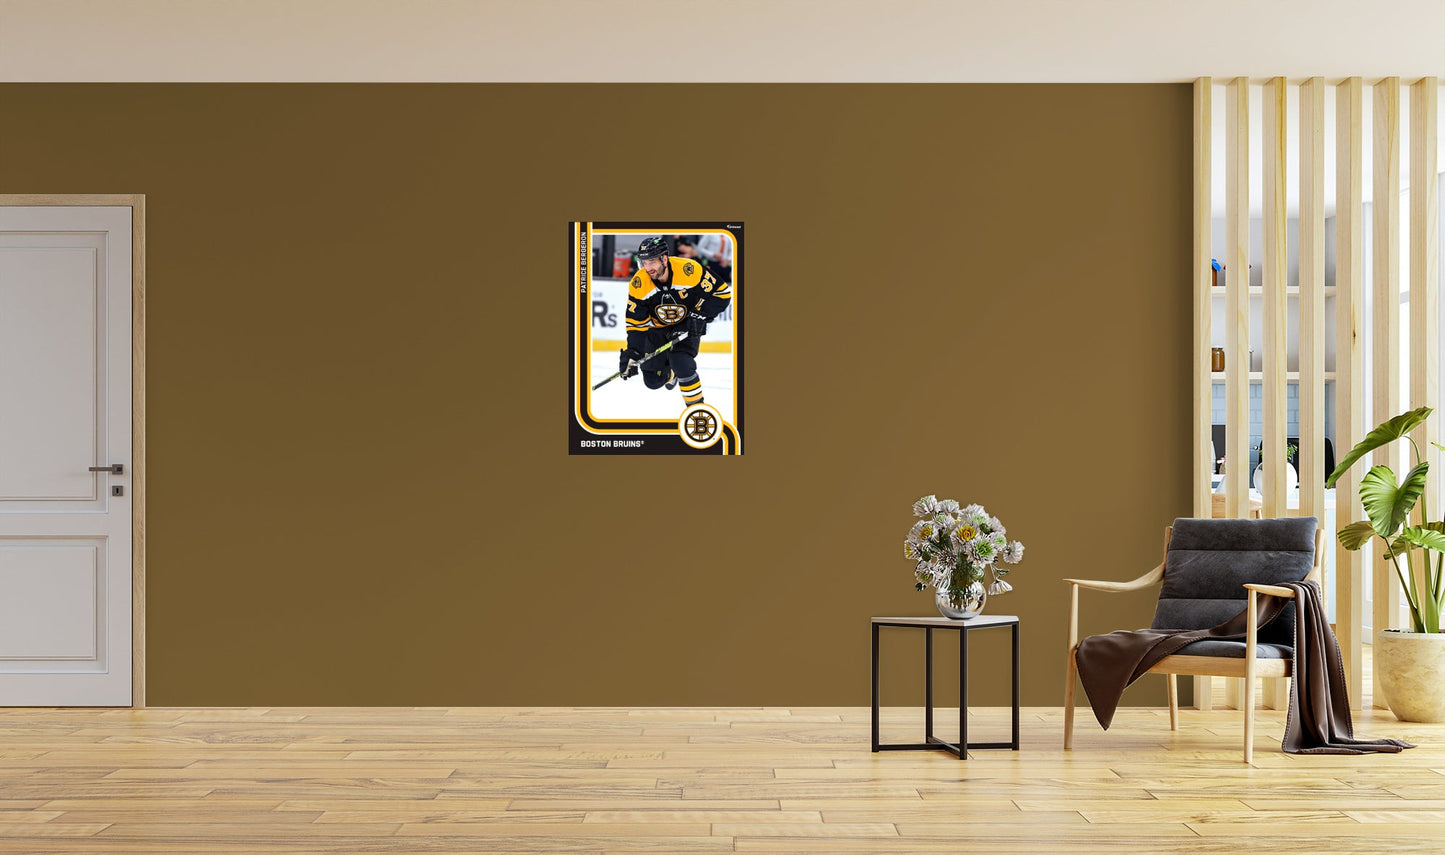 Boston Bruins: Patrice Bergeron Poster - Officially Licensed NHL Removable Adhesive Decal